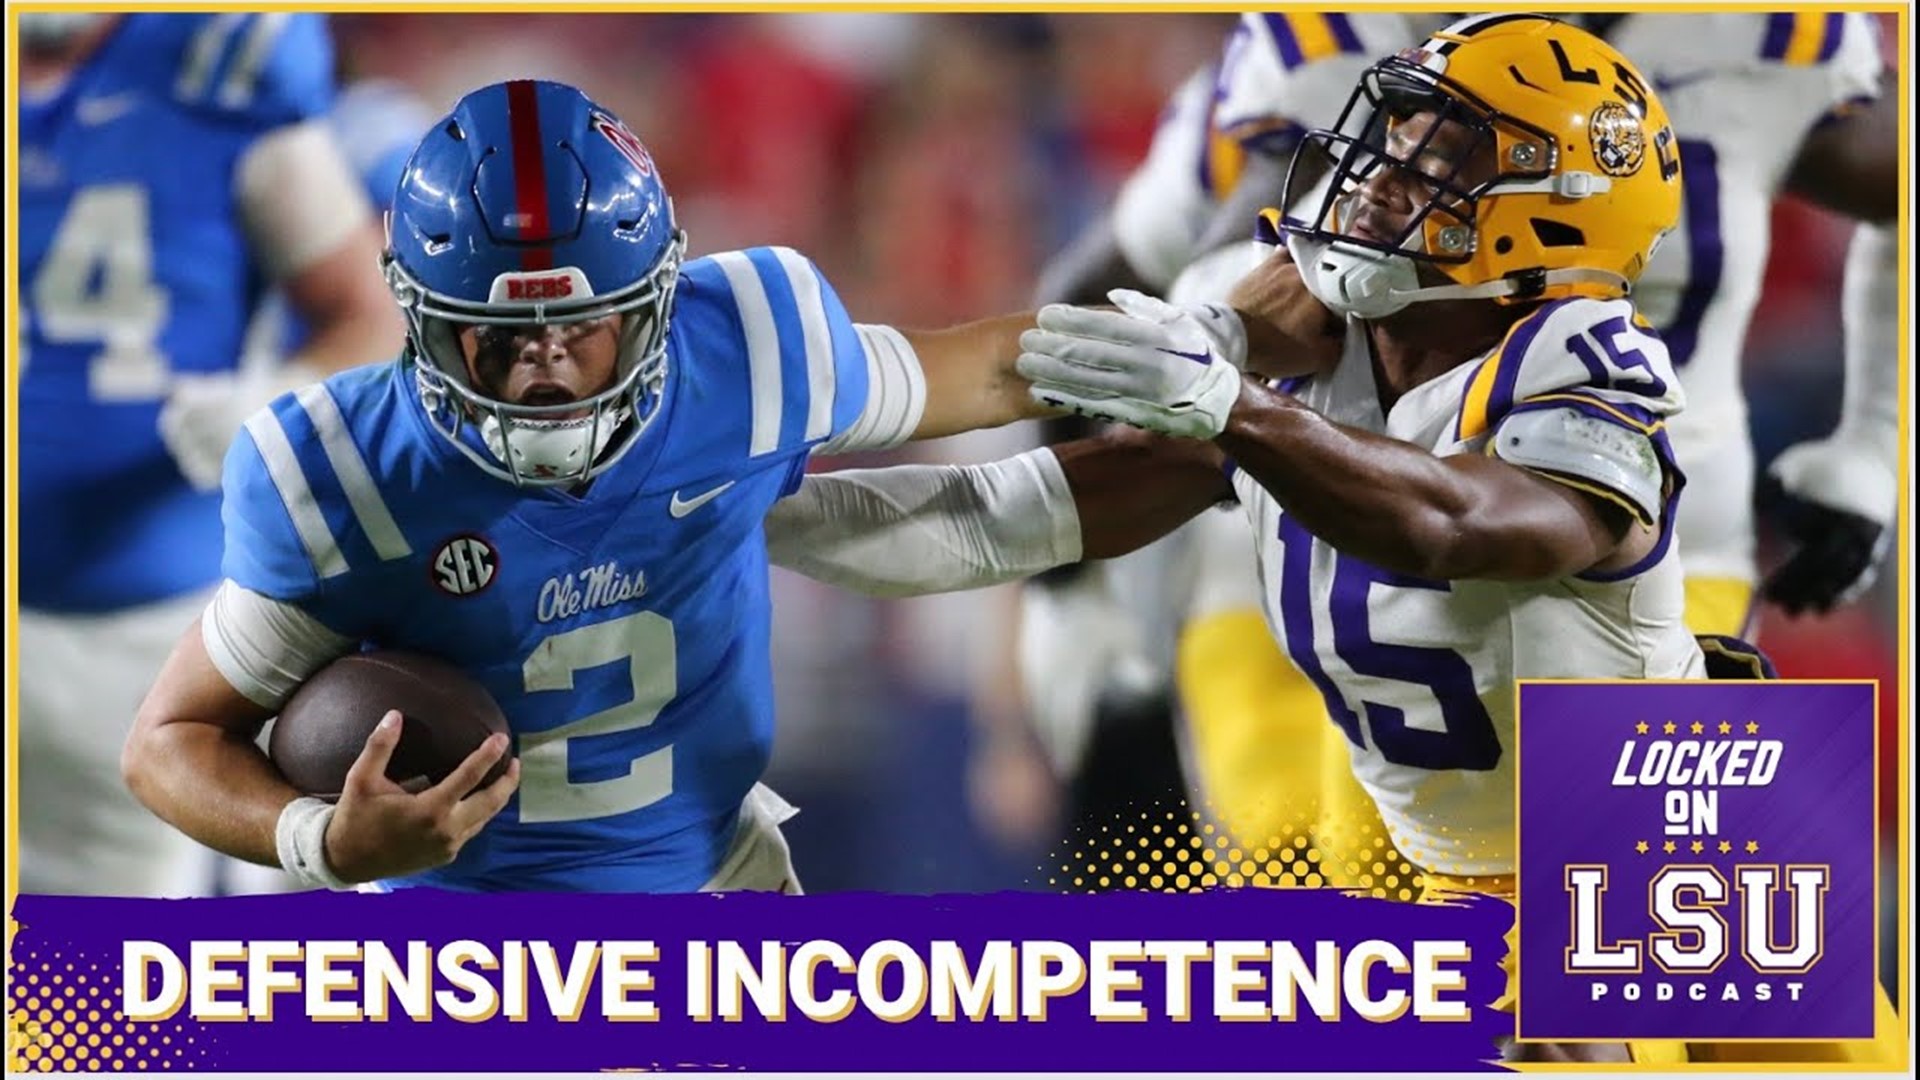 LSU gave up a stunning 55 points and over 700 yards of offense to Ole Miss Saturday.